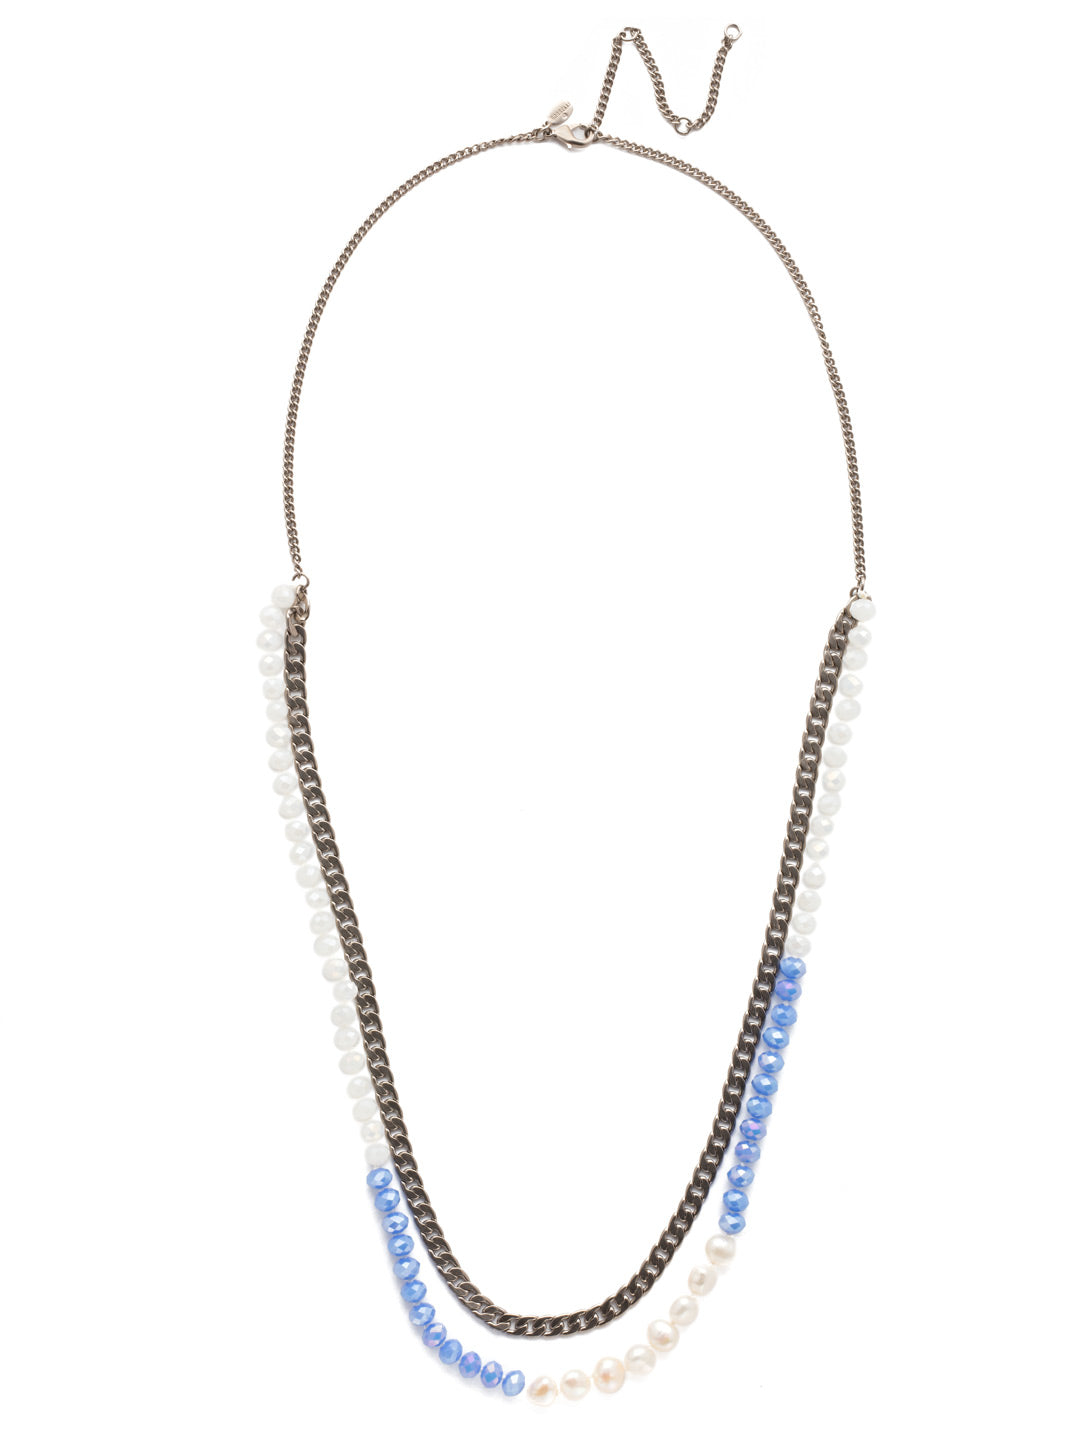 Brienne Long Strand Necklace - NEF42ASGLC - A well-balanced combination of box chain and beads are found throughout this edgy stranded necklace that is sure to add light catching shine to any outfit. From Sorrelli's Glacier collection in our Antique Silver-tone finish.